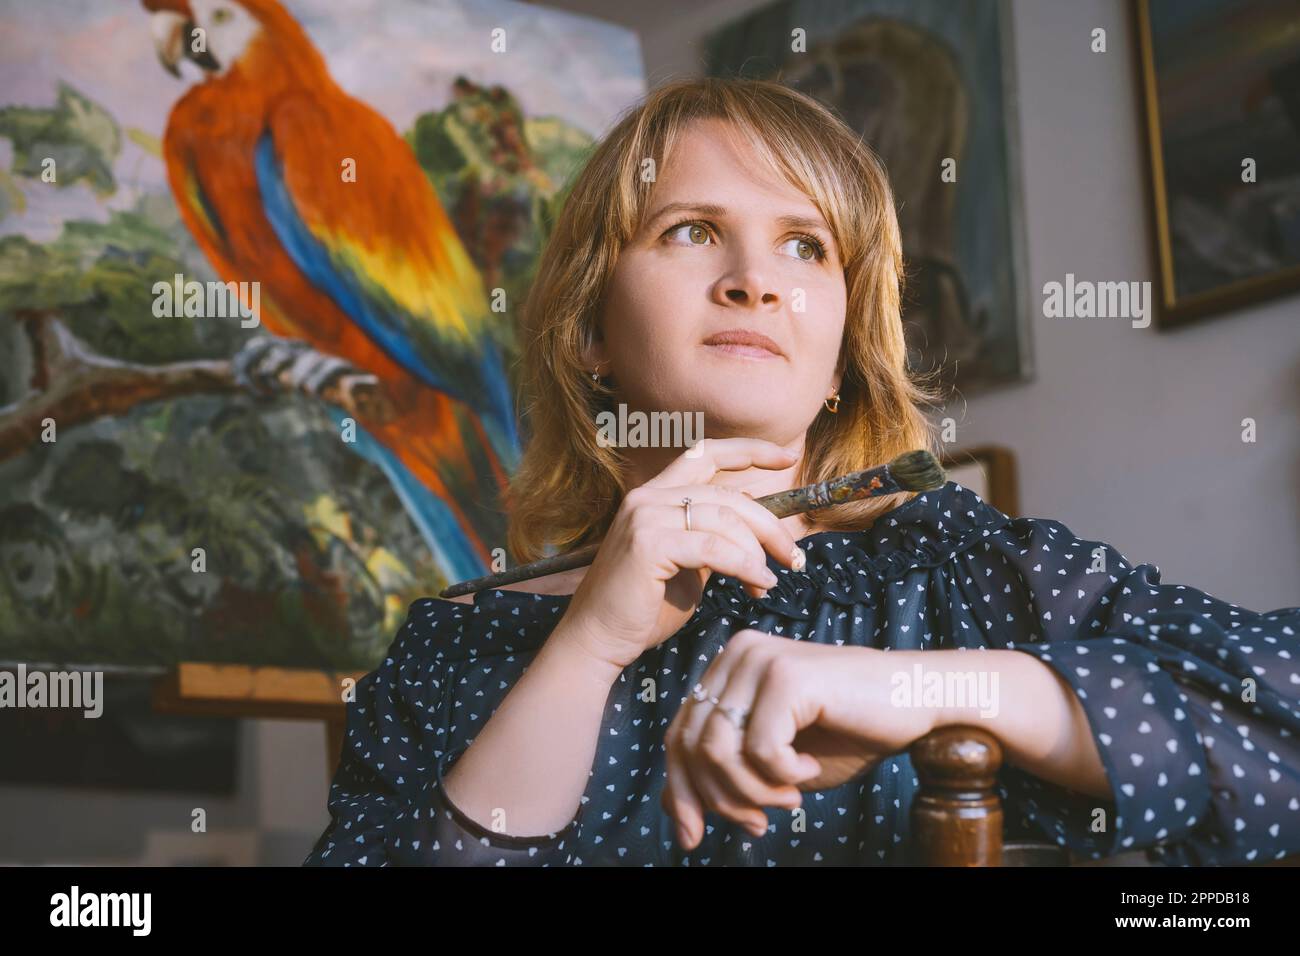 Thoughtful woman with hand on chin holding paintbrush in front of bird painting at workshop Stock Photo